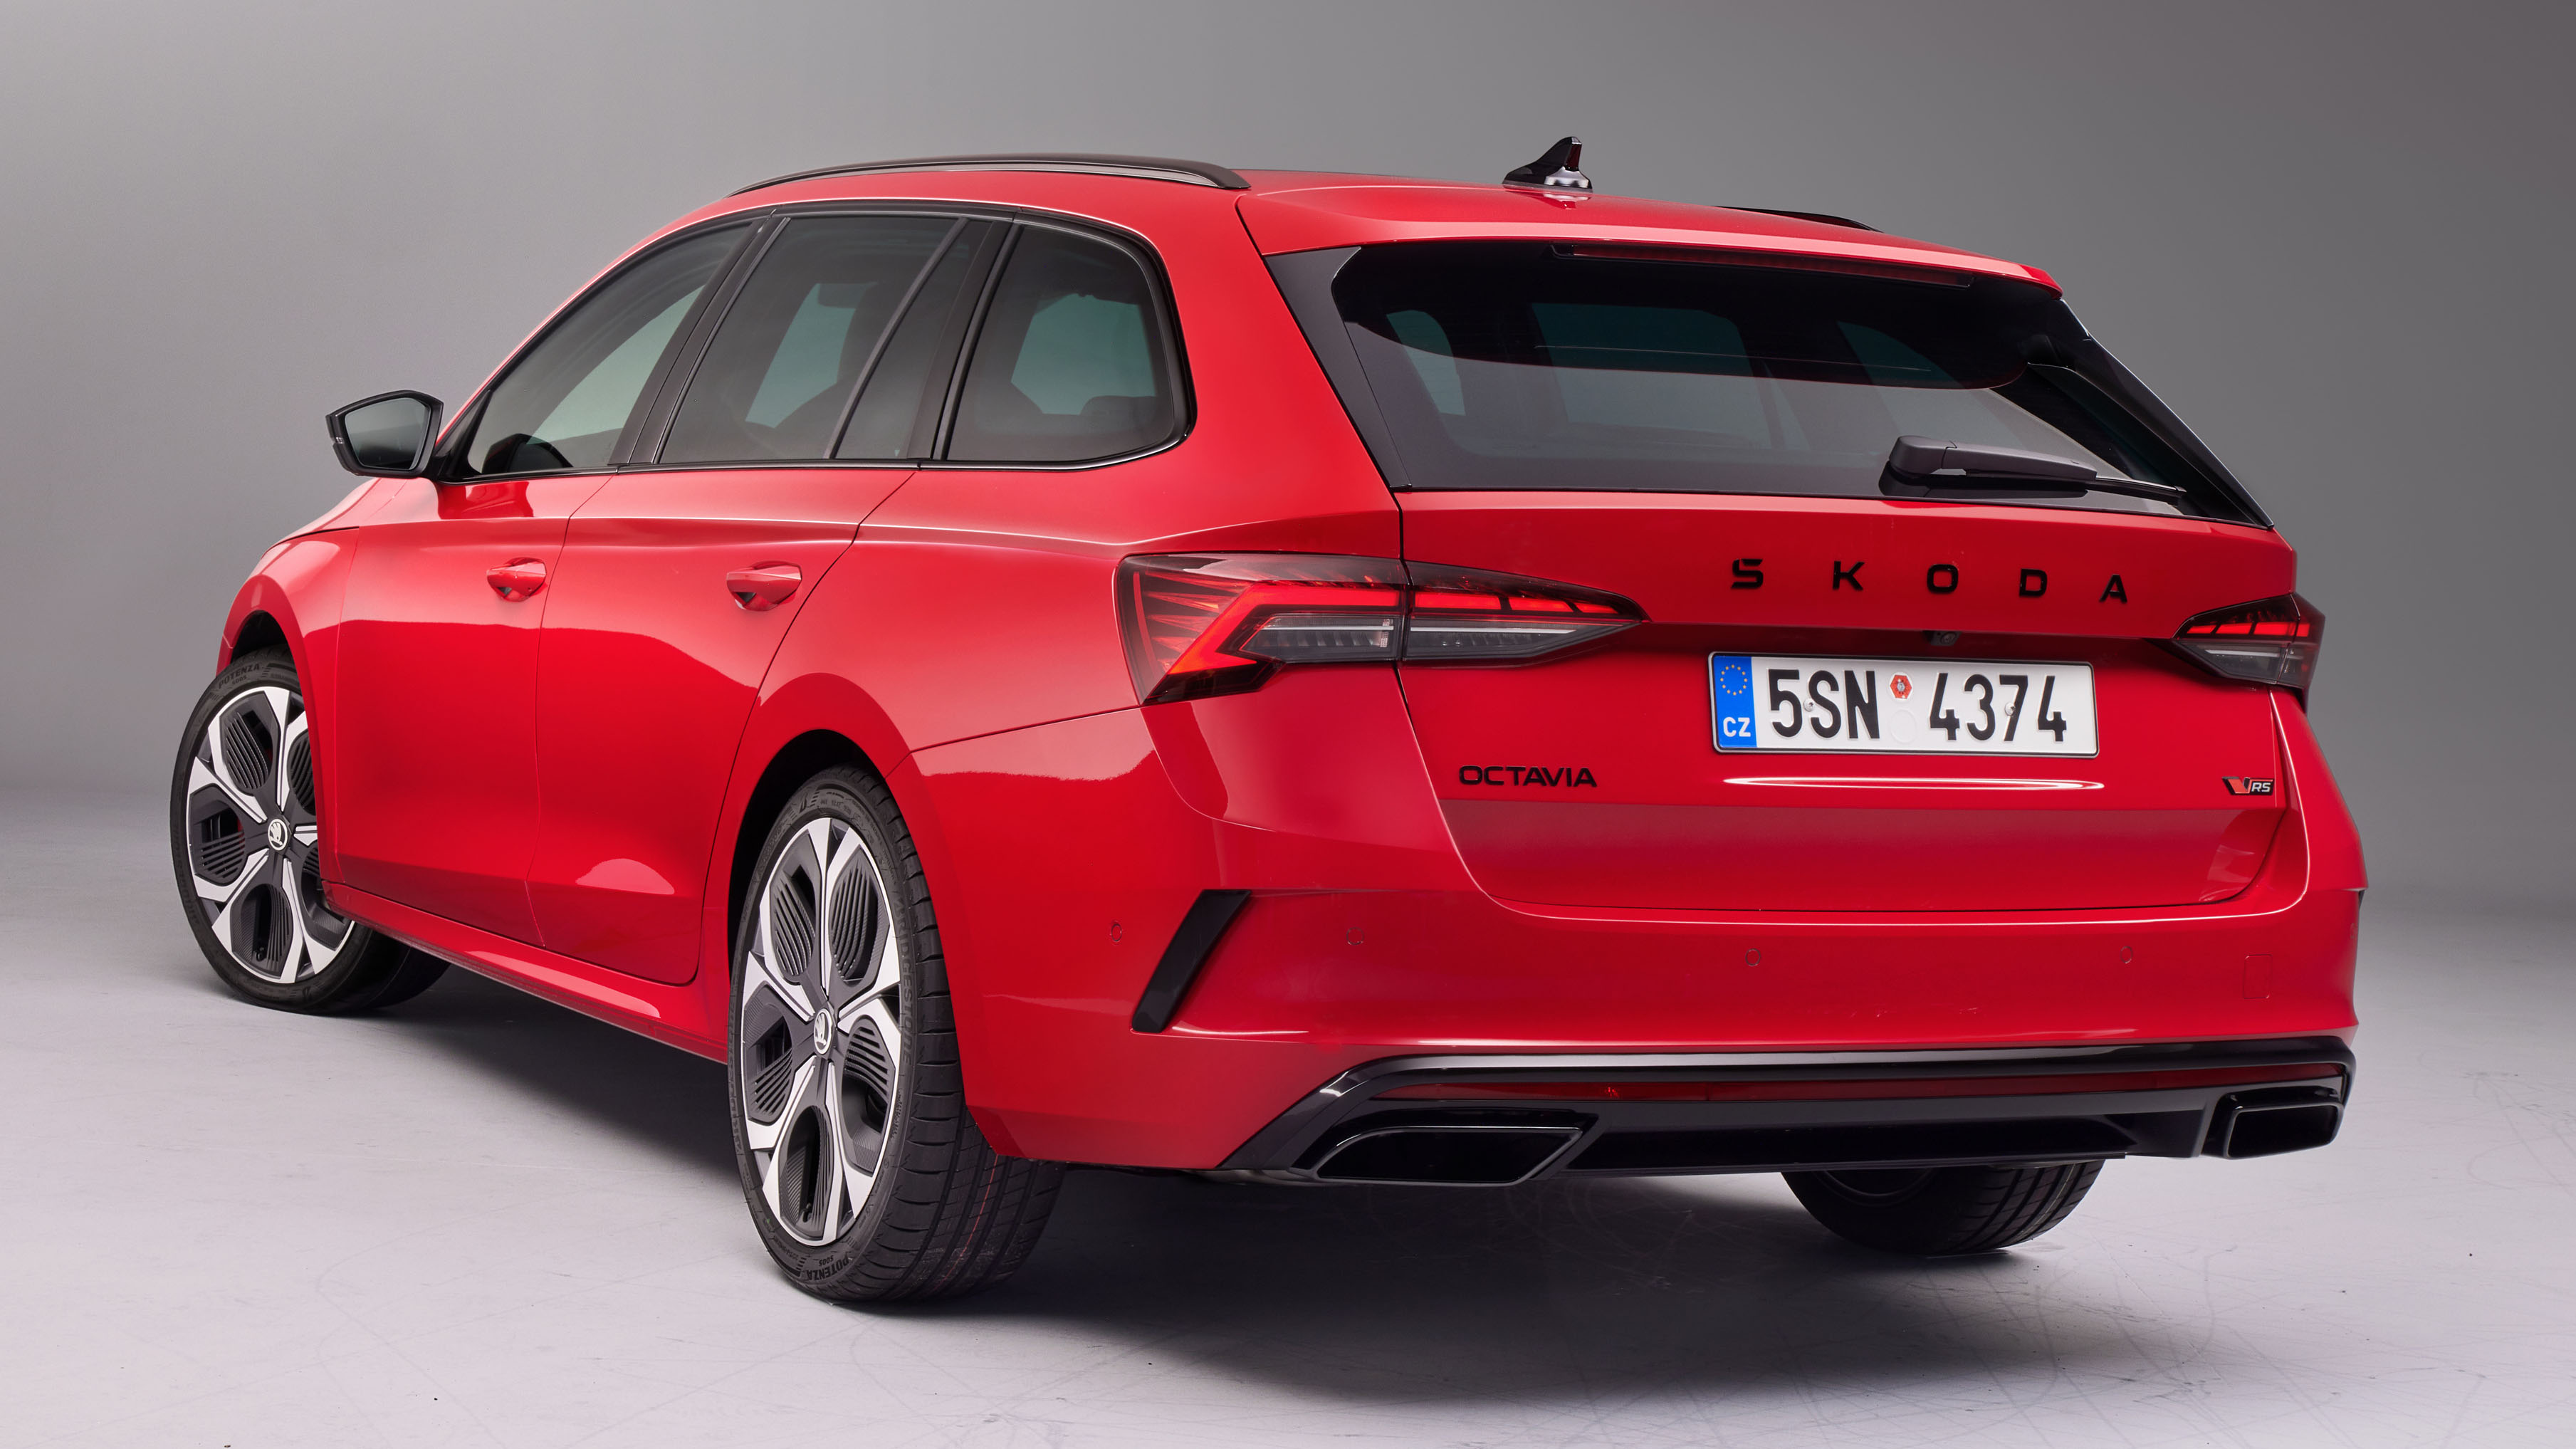 the new skoda octavia vrs is now 20bhp more powerful